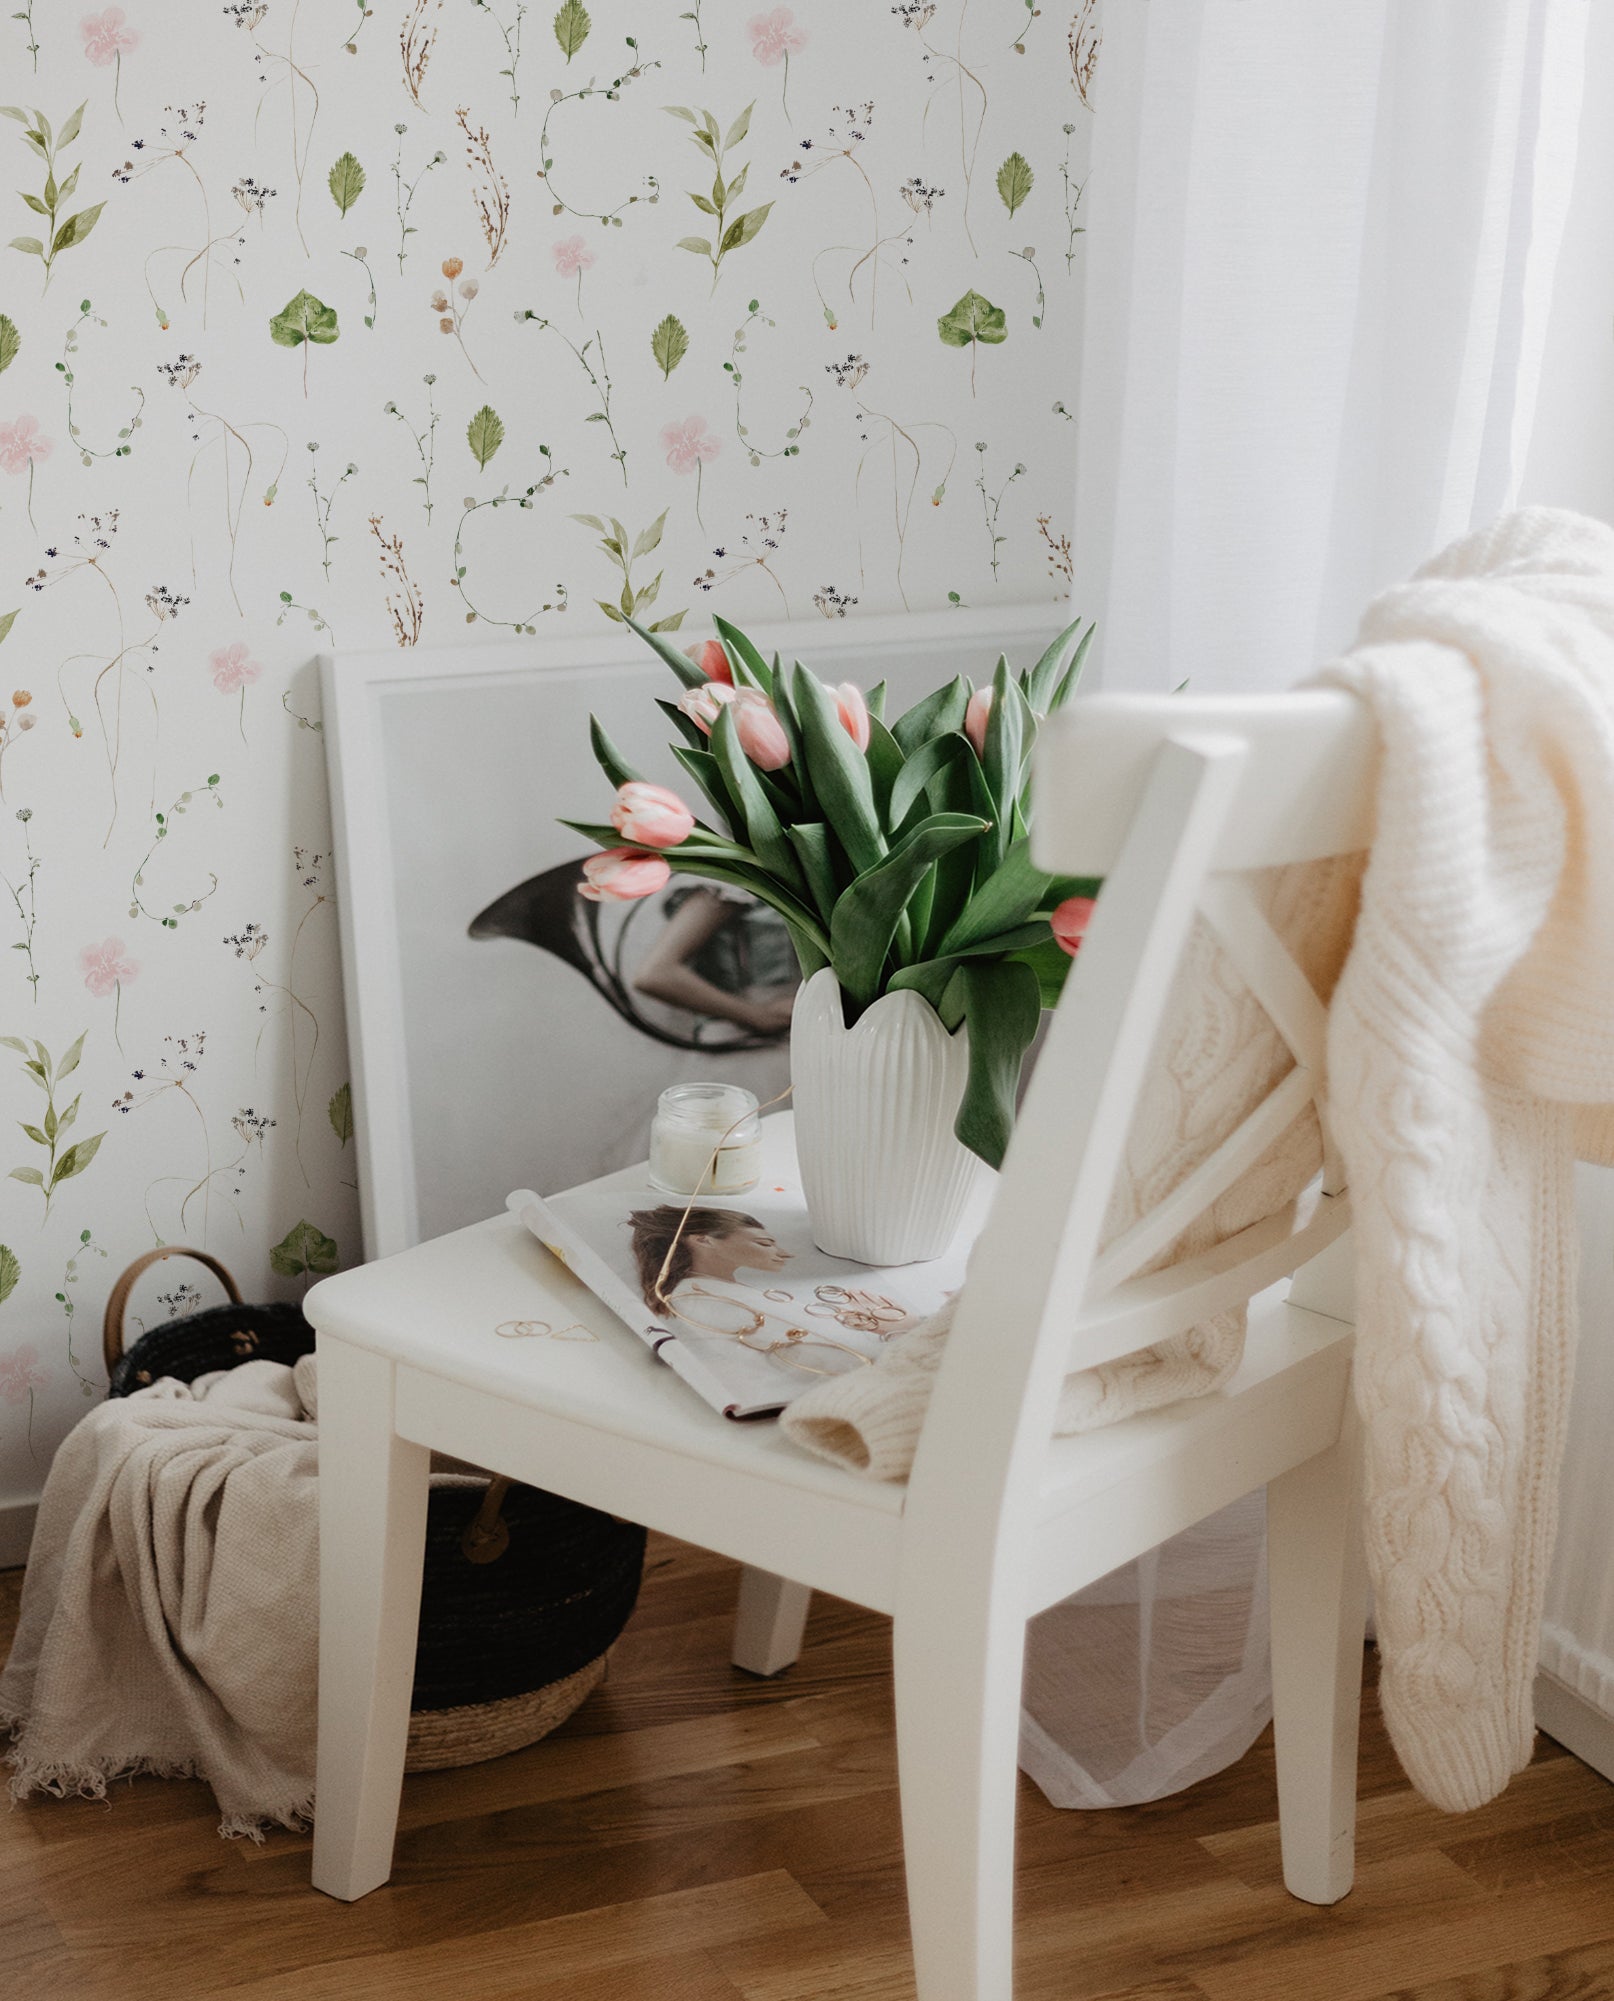 A charming and tranquil corner of a room featuring a chair with a white frame against a wall covered with Watercolour Floral Wallpaper in Blush Pink. The wallpaper depicts a beautiful array of watercolor flowers in soft pink, tender green leaves, and delicate brown branches, creating a gentle and romantic ambiance. A white vase on the chair holds a bouquet of fresh tulips, complemented by a cozy cream knit blanket draped over the chair's back and a decorative magazine, evoking a serene and inviting space.